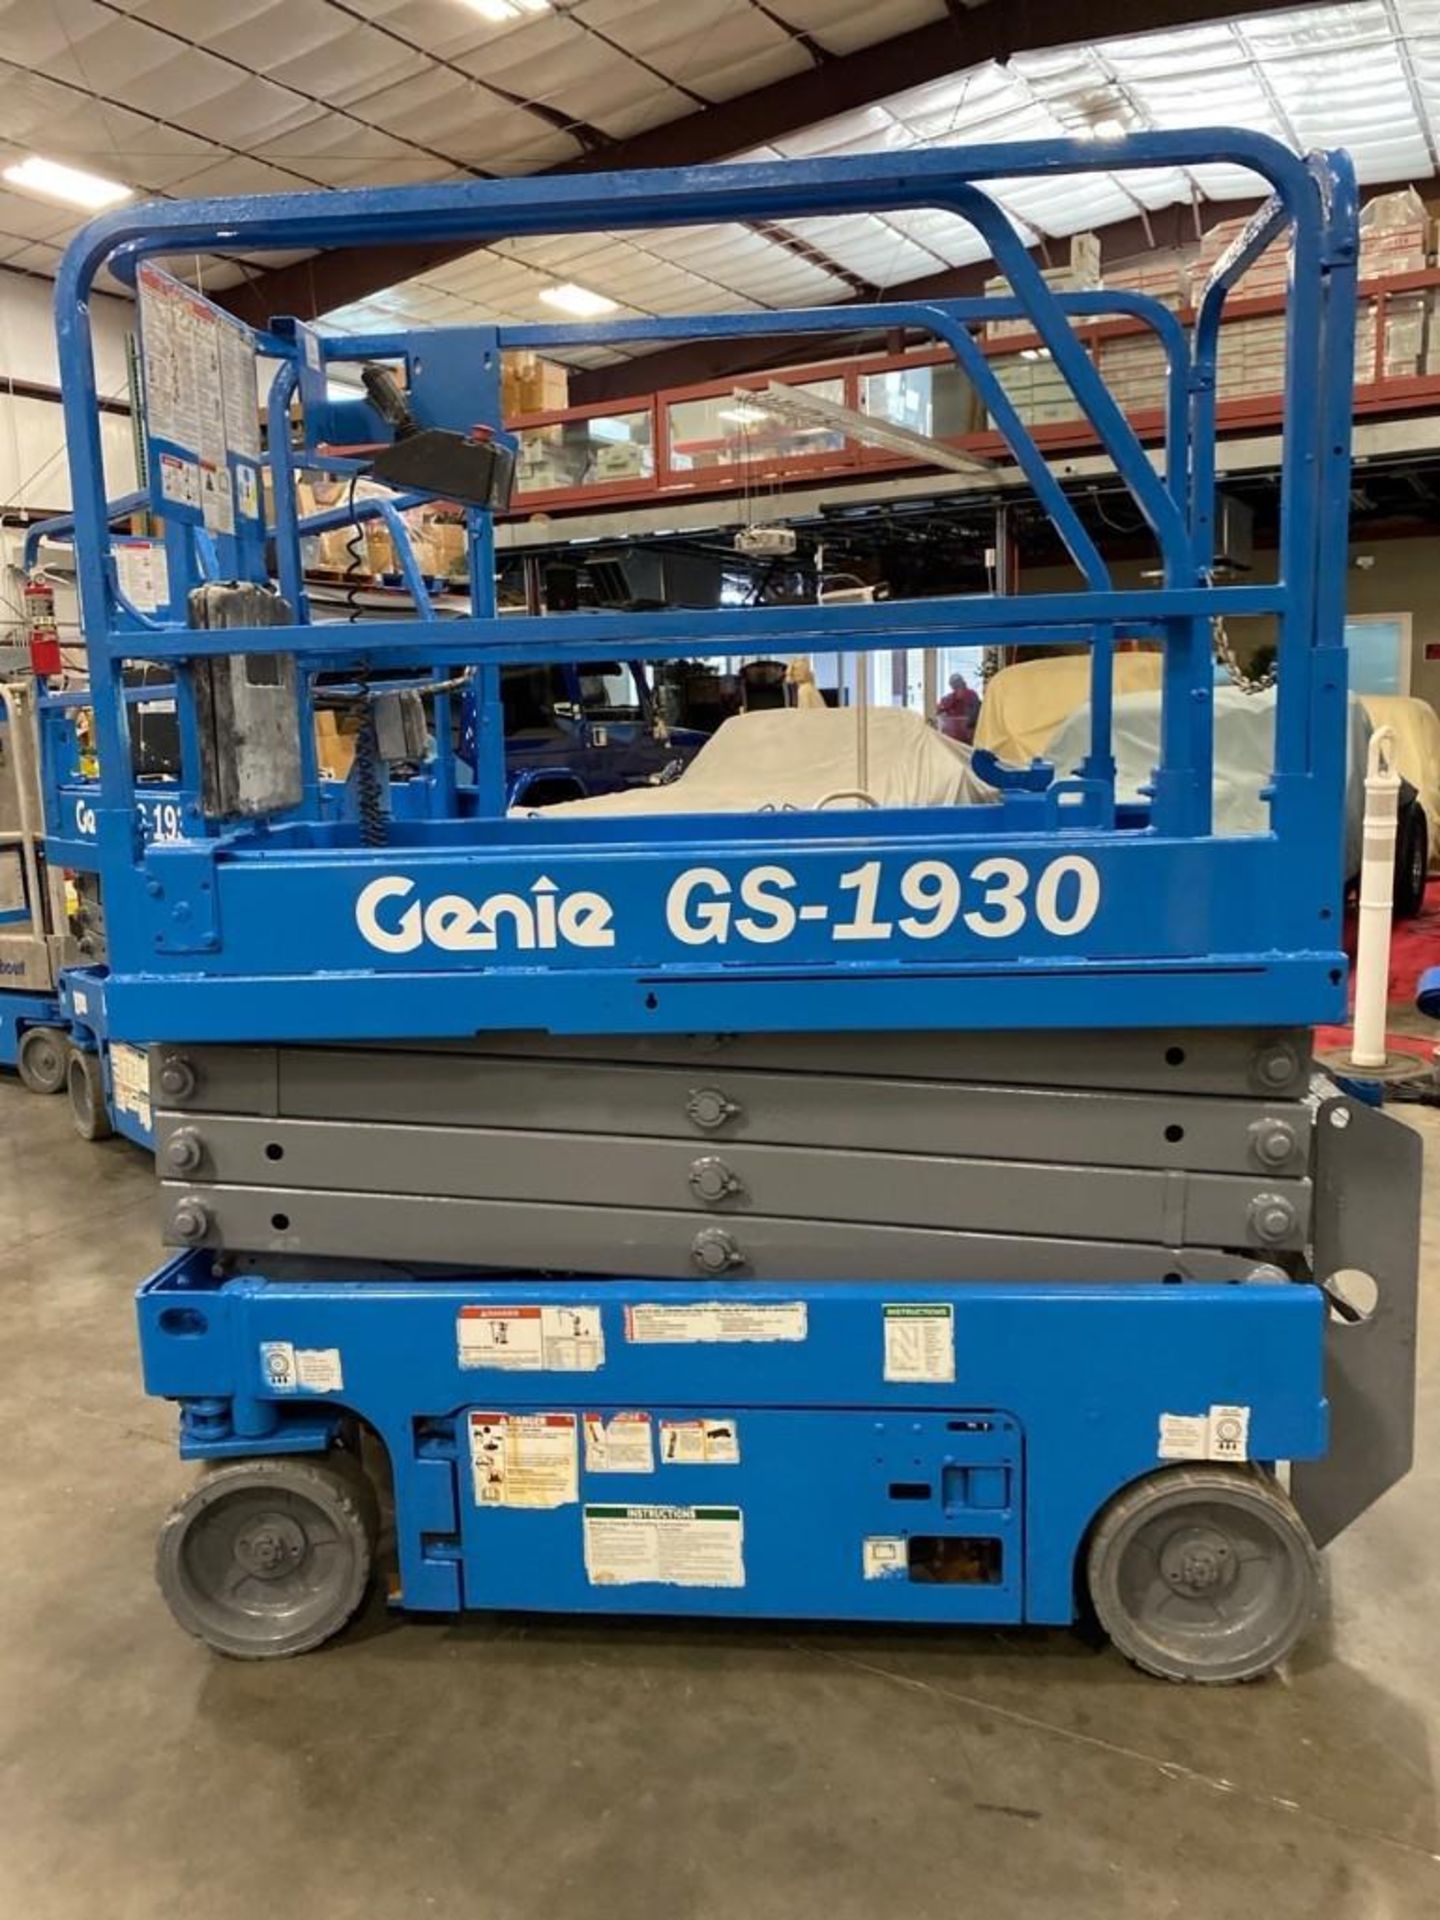 2013 GENIE GS-1930 ELECTRIC SCISSOR LIFT, SELF PROPELLED, 19' PLATFORM HEIGHT, BUILT IN BATTERY CHAR - Image 2 of 7